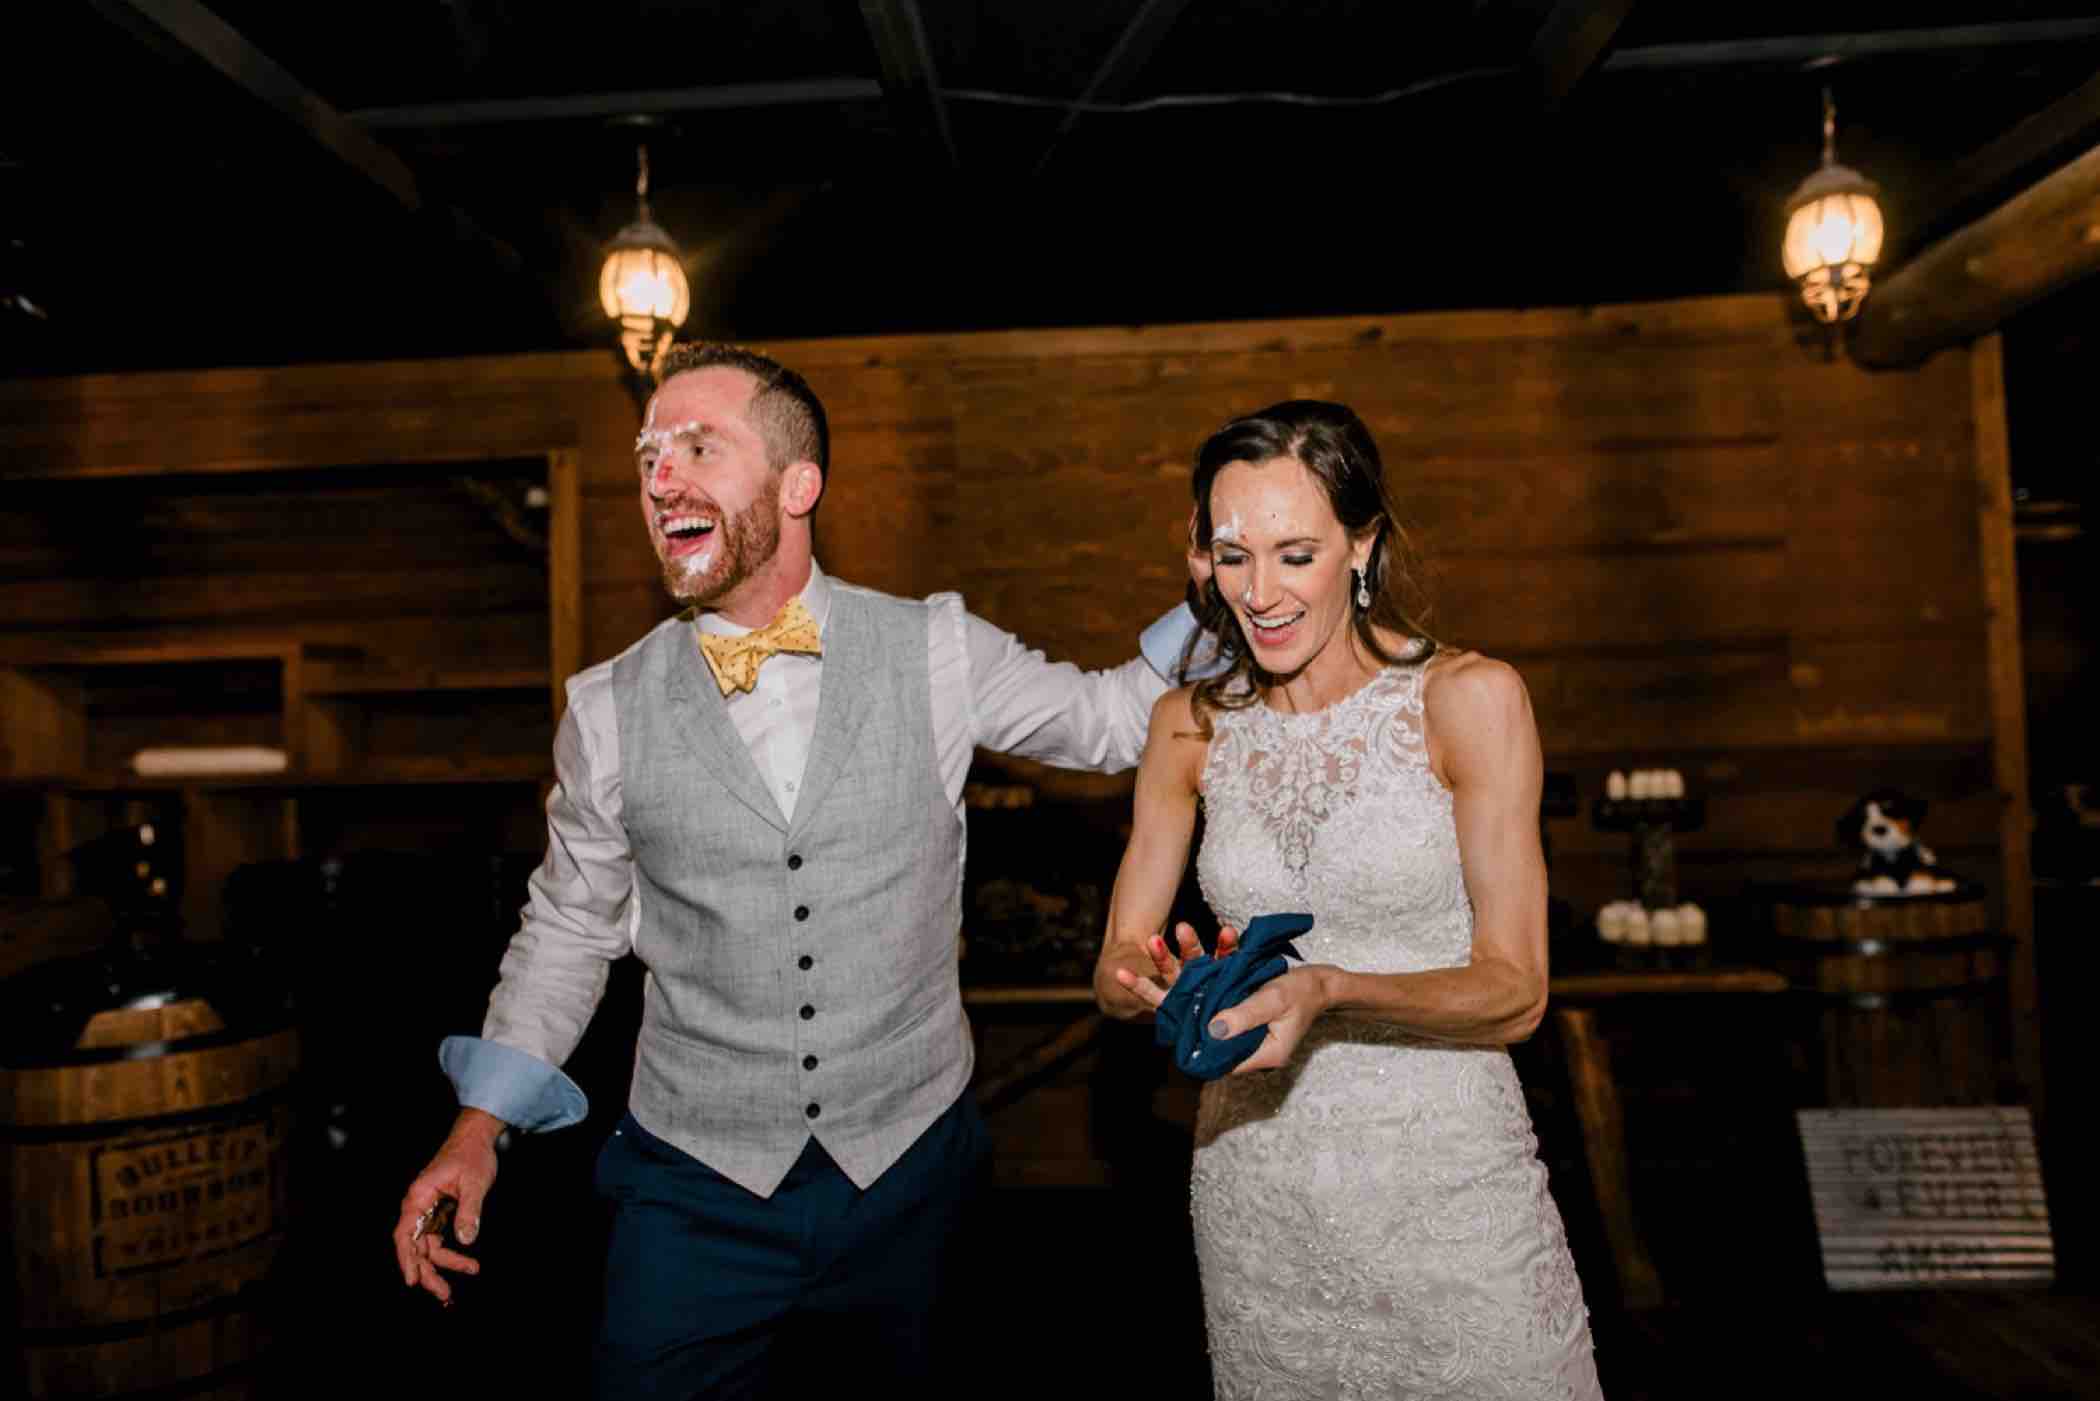 Kris and Sallie celebrate after cutting the cake at their wedding reception at Piney River Ranch in Vail Colorado. Photo by Ali and Garrett, Romantic, Adventurous, Nostalgic Wedding Photographers.